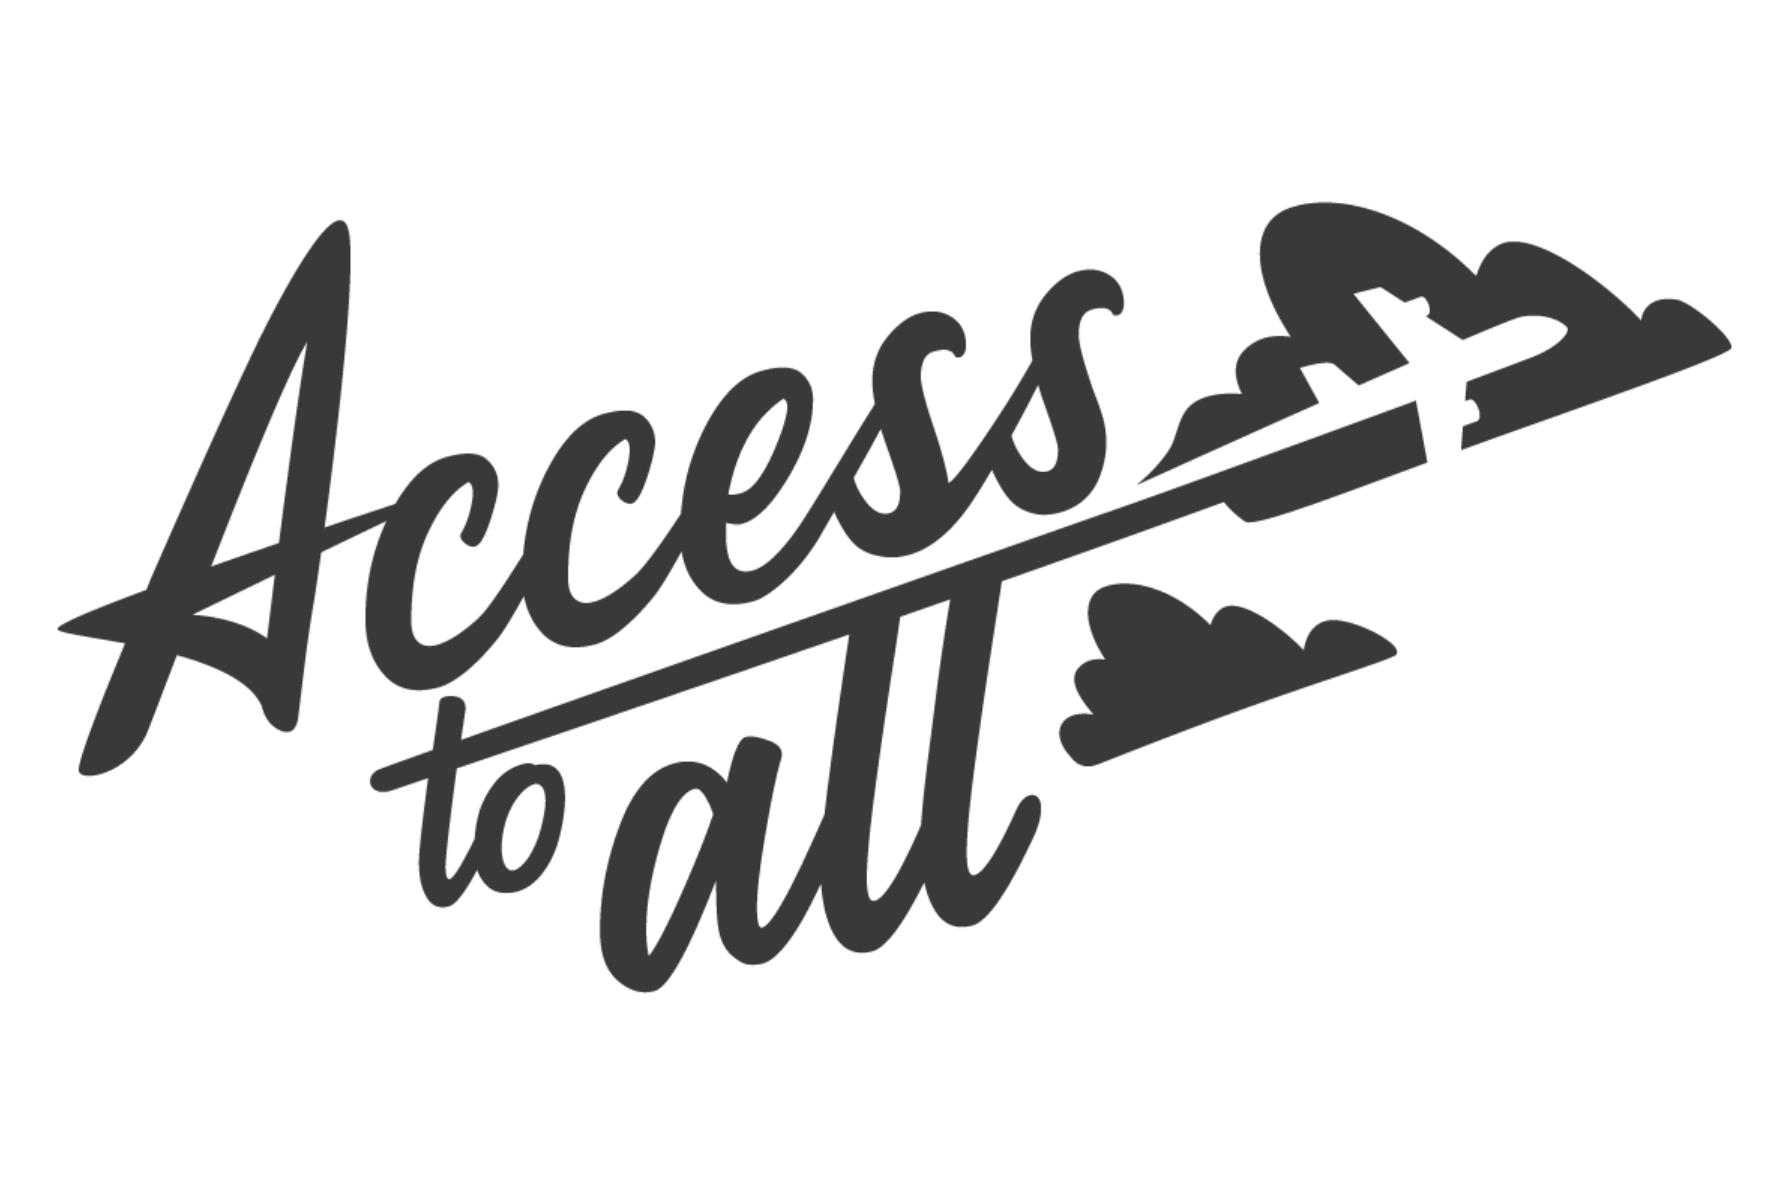 Access to All logo